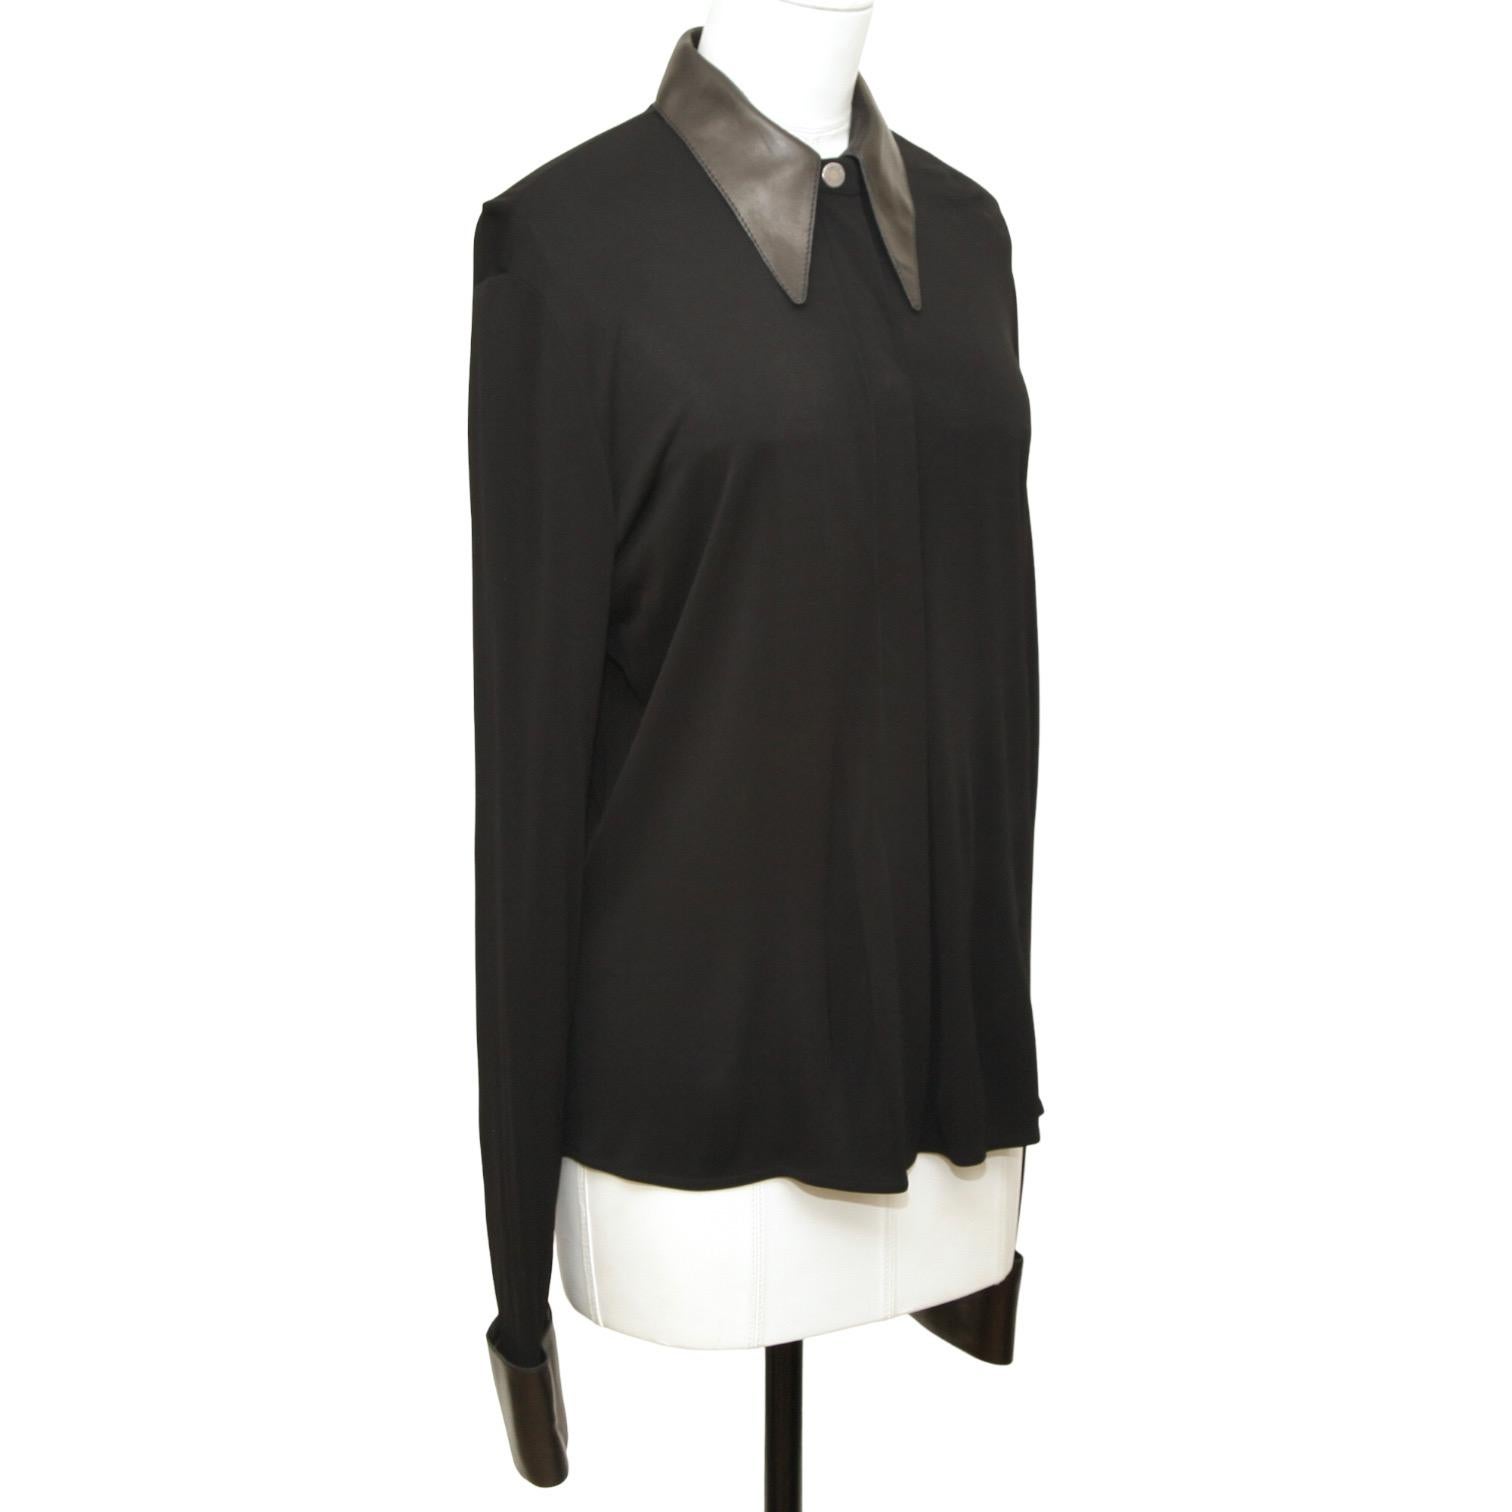 GUARANTEED AUTHENTIC VINTAGE HERMES BLACK LONG SLEEVE  BLOUSE

Design:
- Long sleeve black blouse.
- Black leather pointed collar and cuffs.
- Covered palladium silver button closure.

Material: 100% Viscose

Size: 42

Measurements (Approximate laid